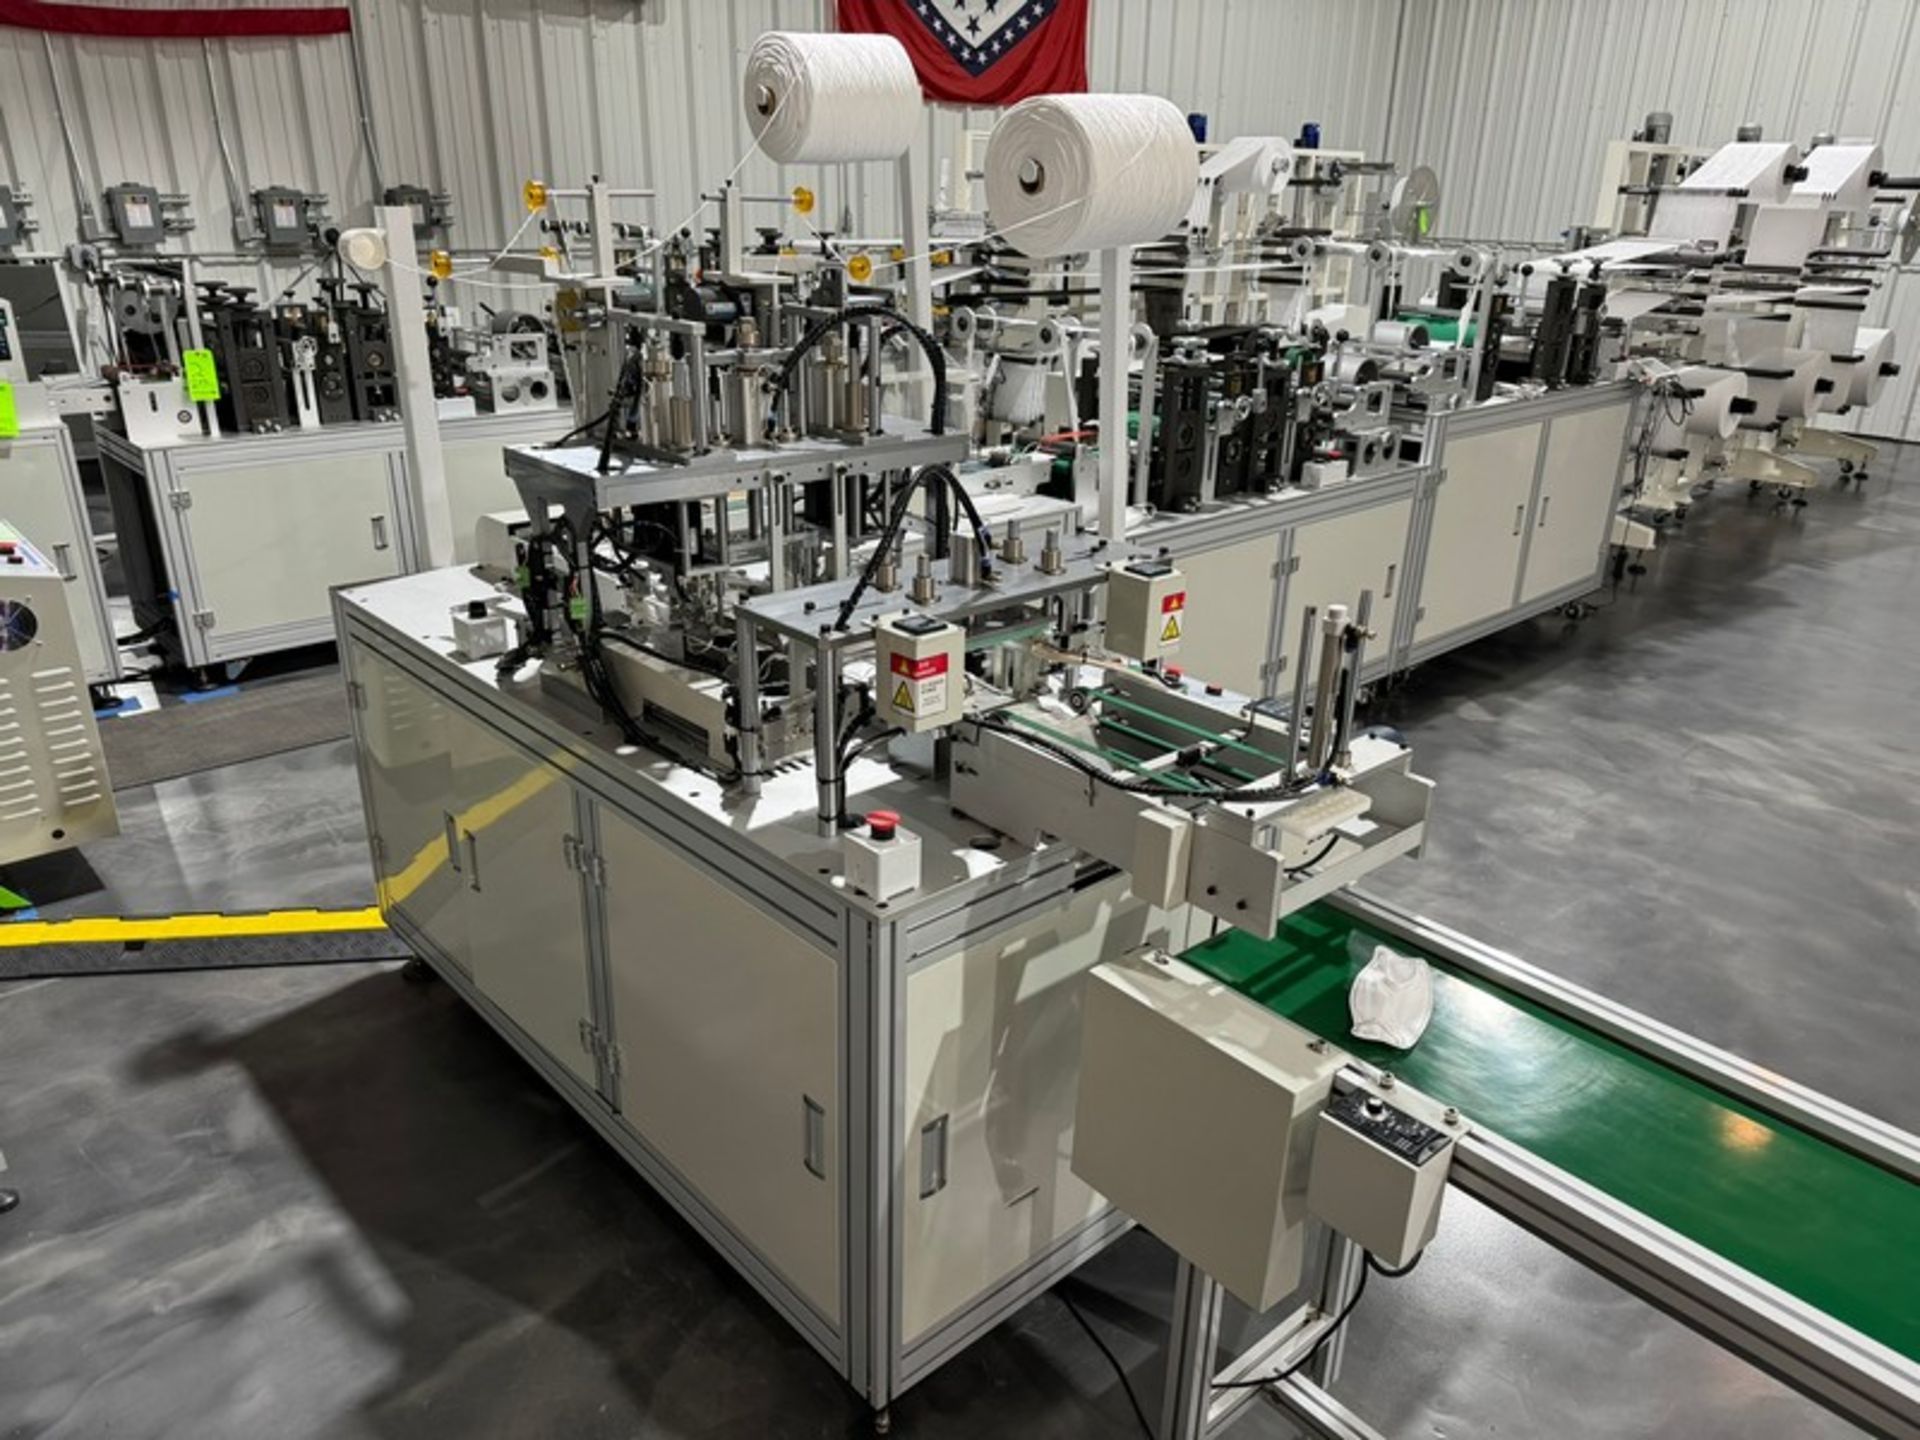 2022 KYD Automatic 6,000 Units Per Hour Mask Manufacturing Line, Includes Unwinding Station, Rolling - Bild 6 aus 30